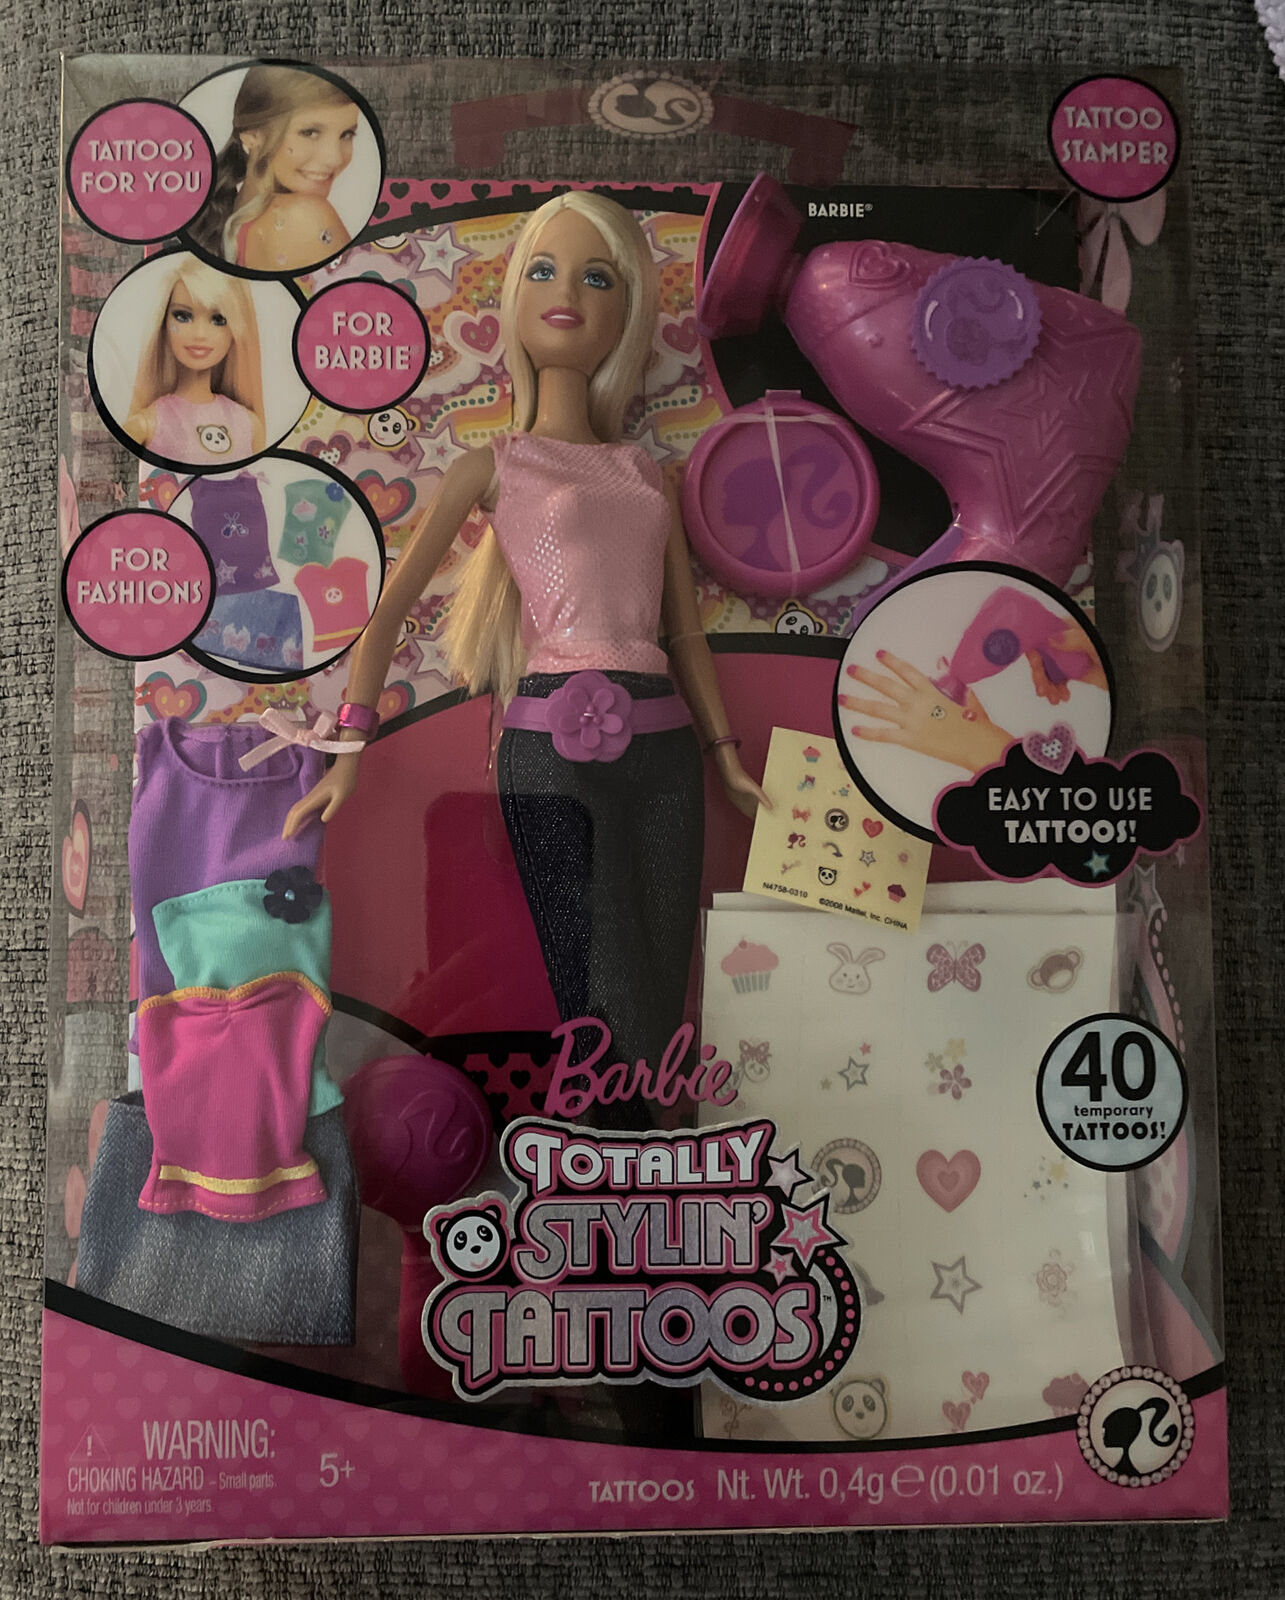 Our Barbies, ourselves: Mattel's ageless icon turns 50